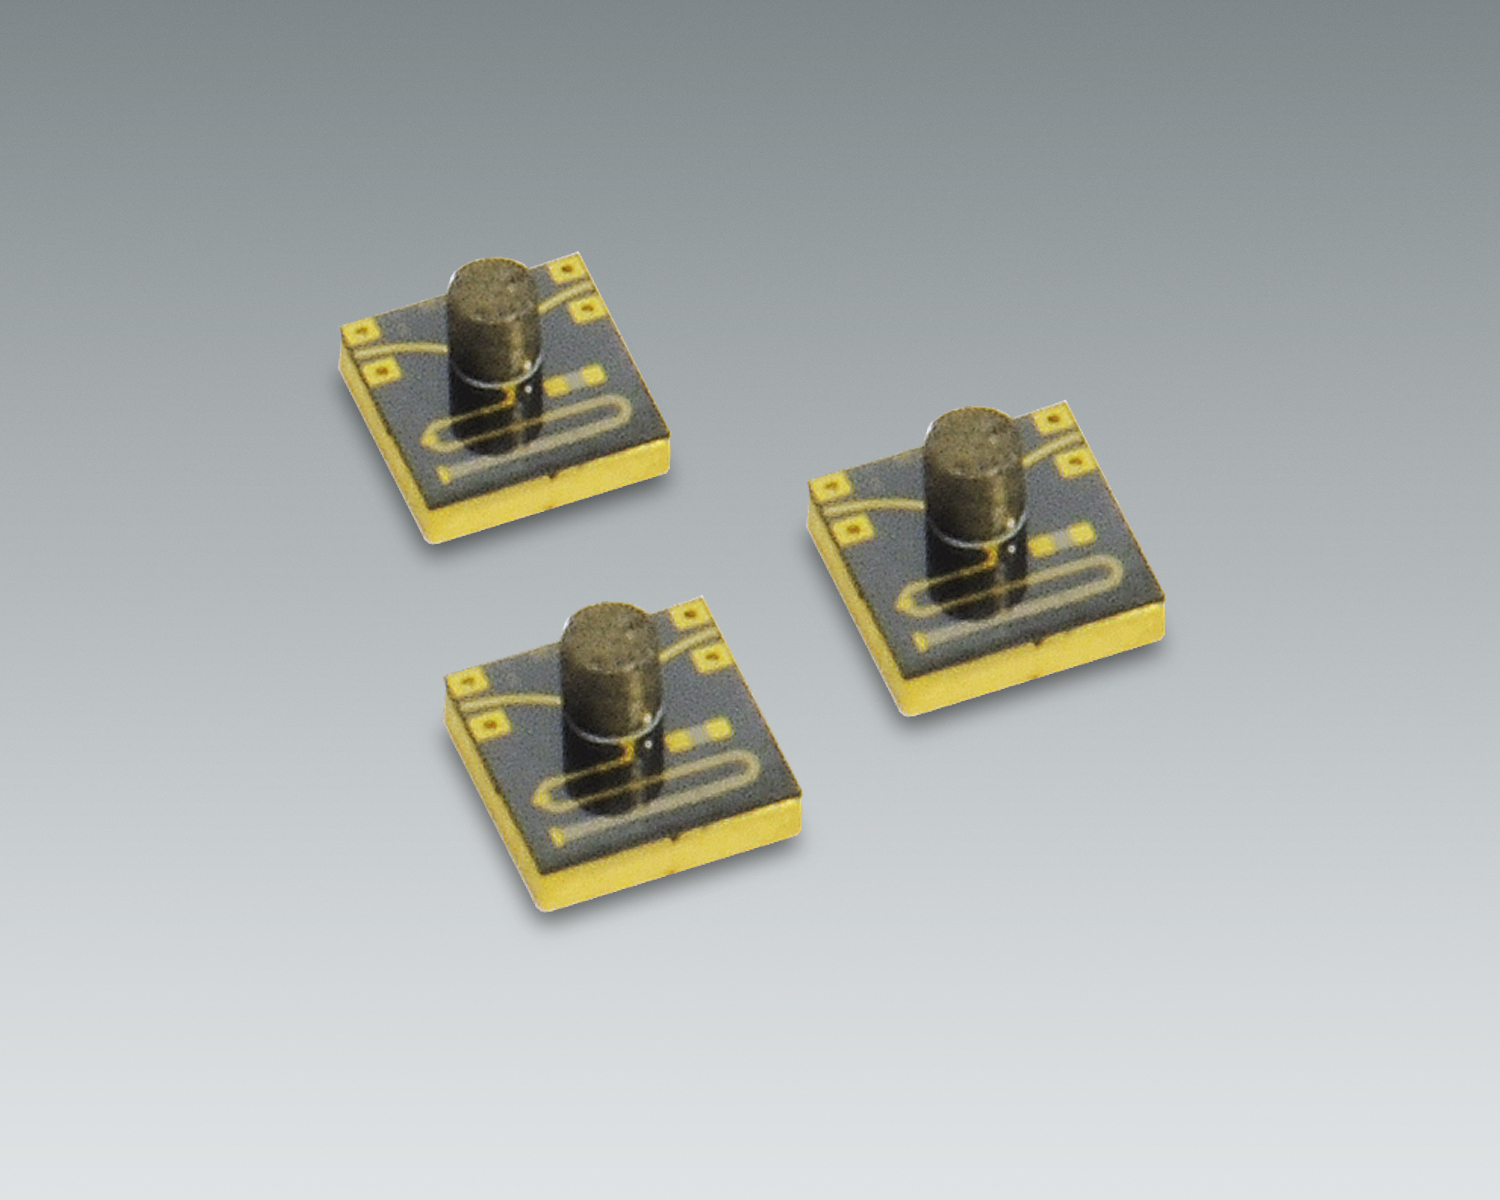 Innovative 30 and 35 GHz Microstrip Isolators Integrate Ferrite with PCB